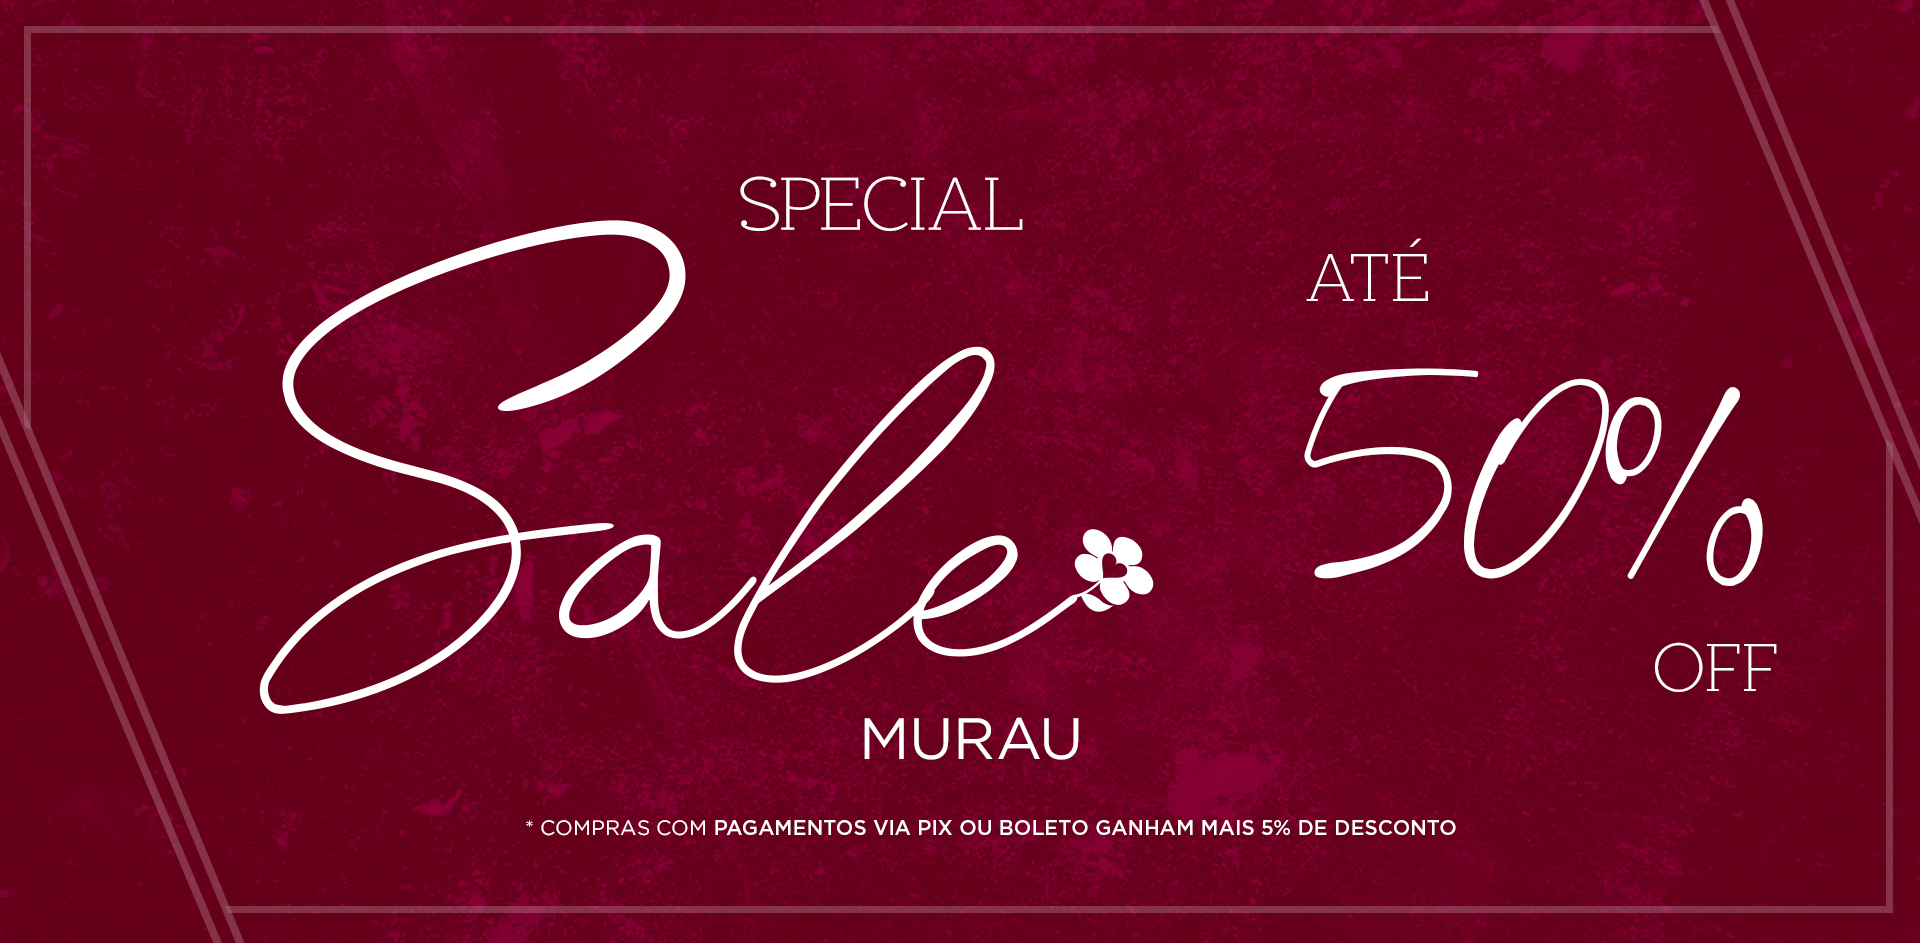 Special Sale